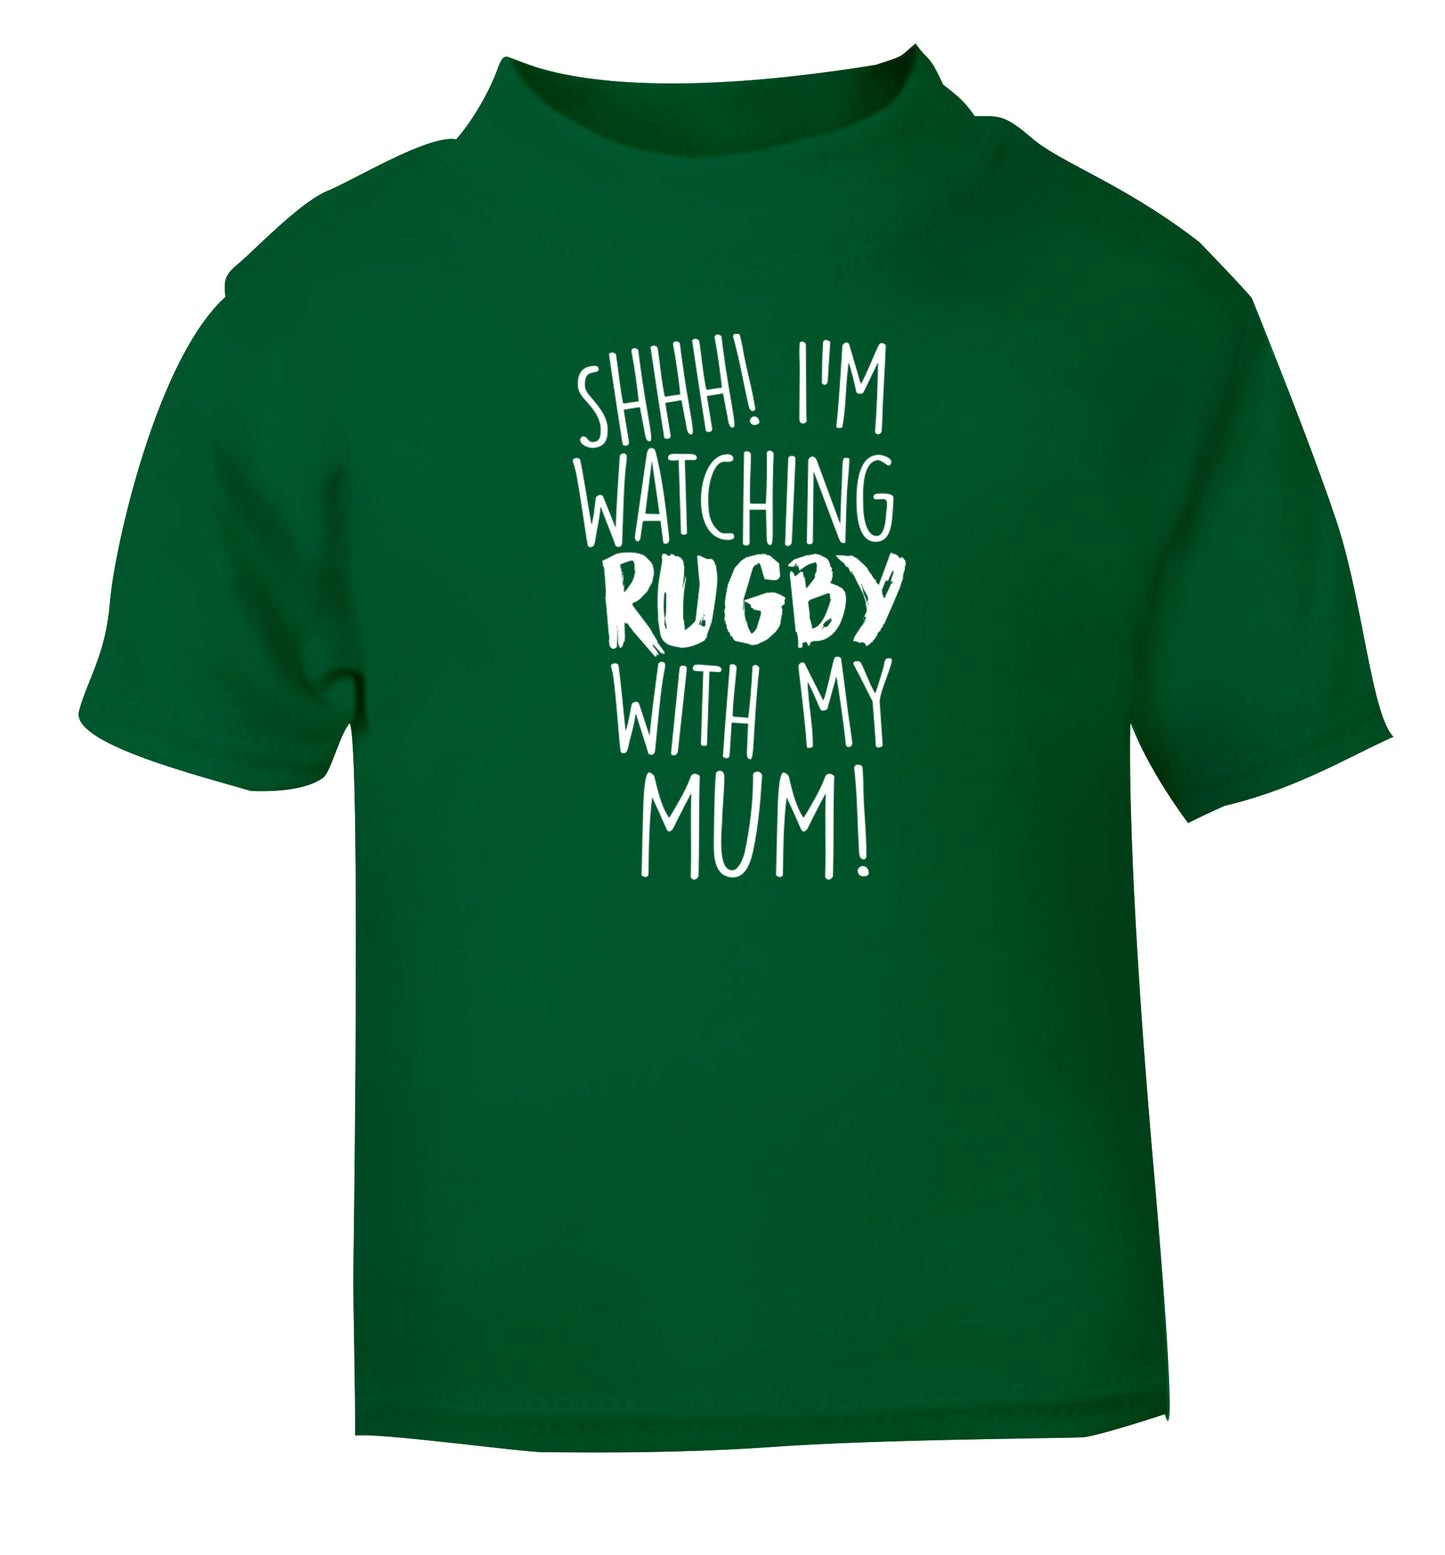 Shh... I'm watching rugby with my mum green Baby Toddler Tshirt 2 Years